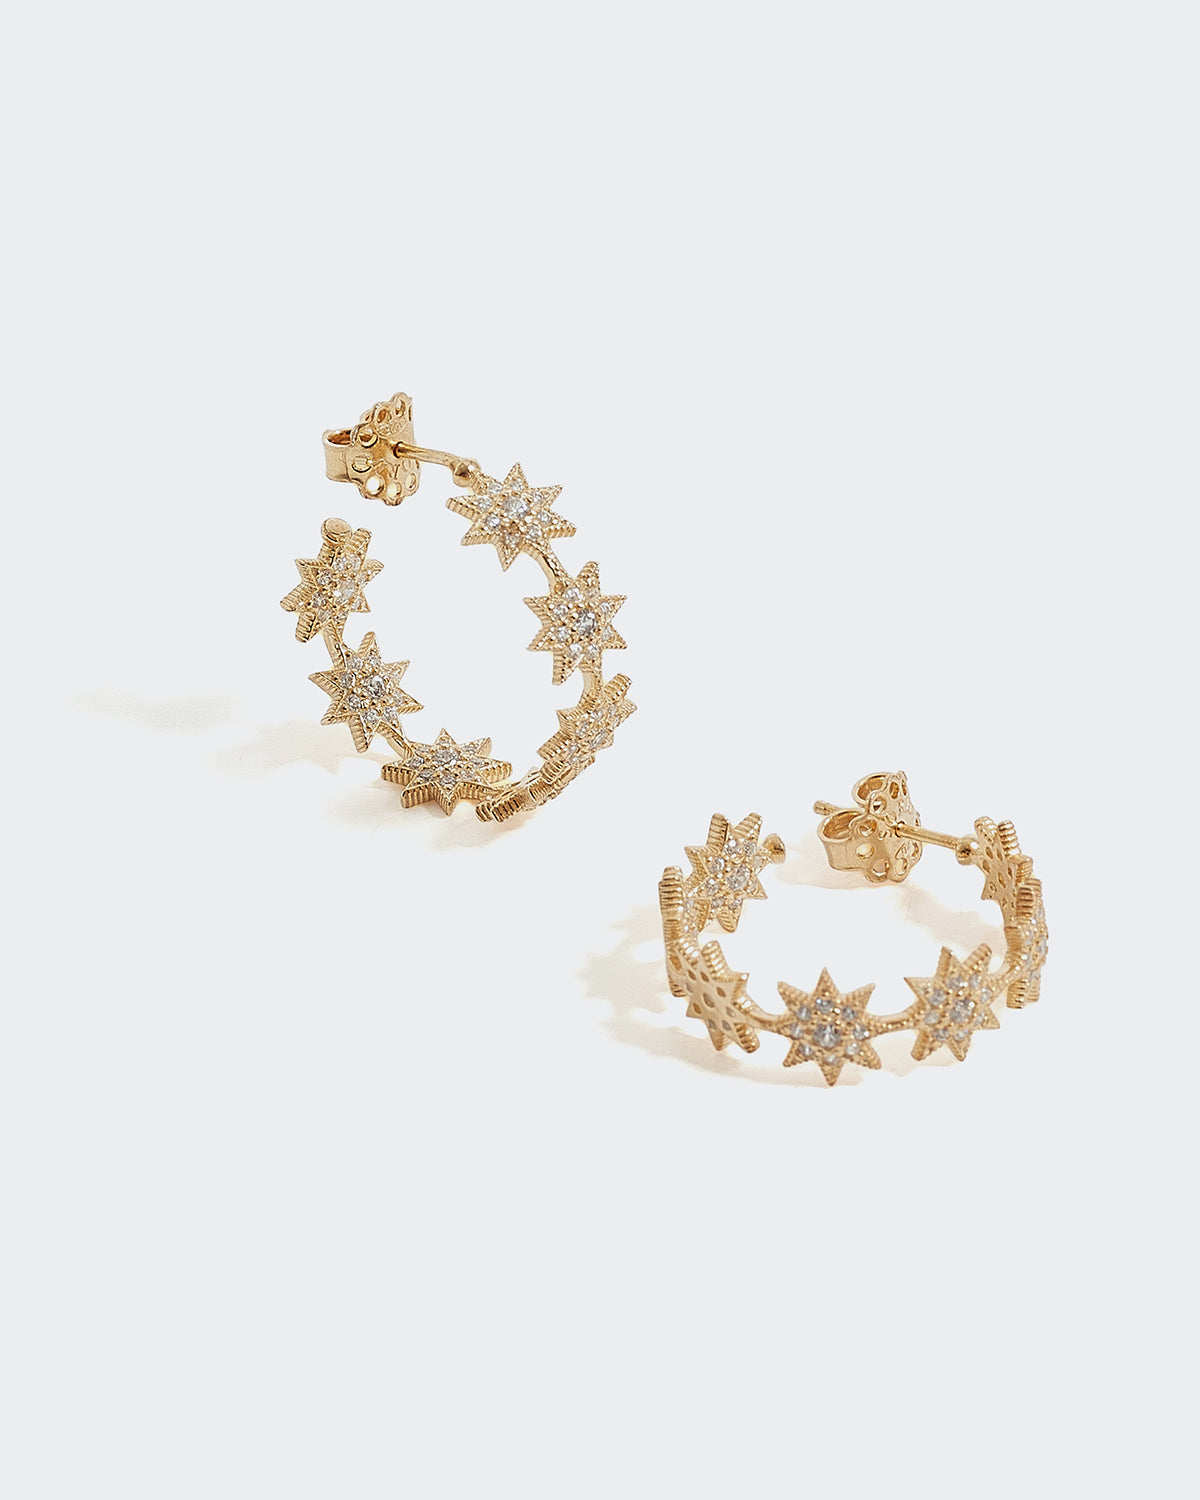 Soru Jewellery Intricate Cosmic Hoop Earrings with delicate interlocking stars embellished with clear Swarovski crystals24ct gold plated solid silver and crystals